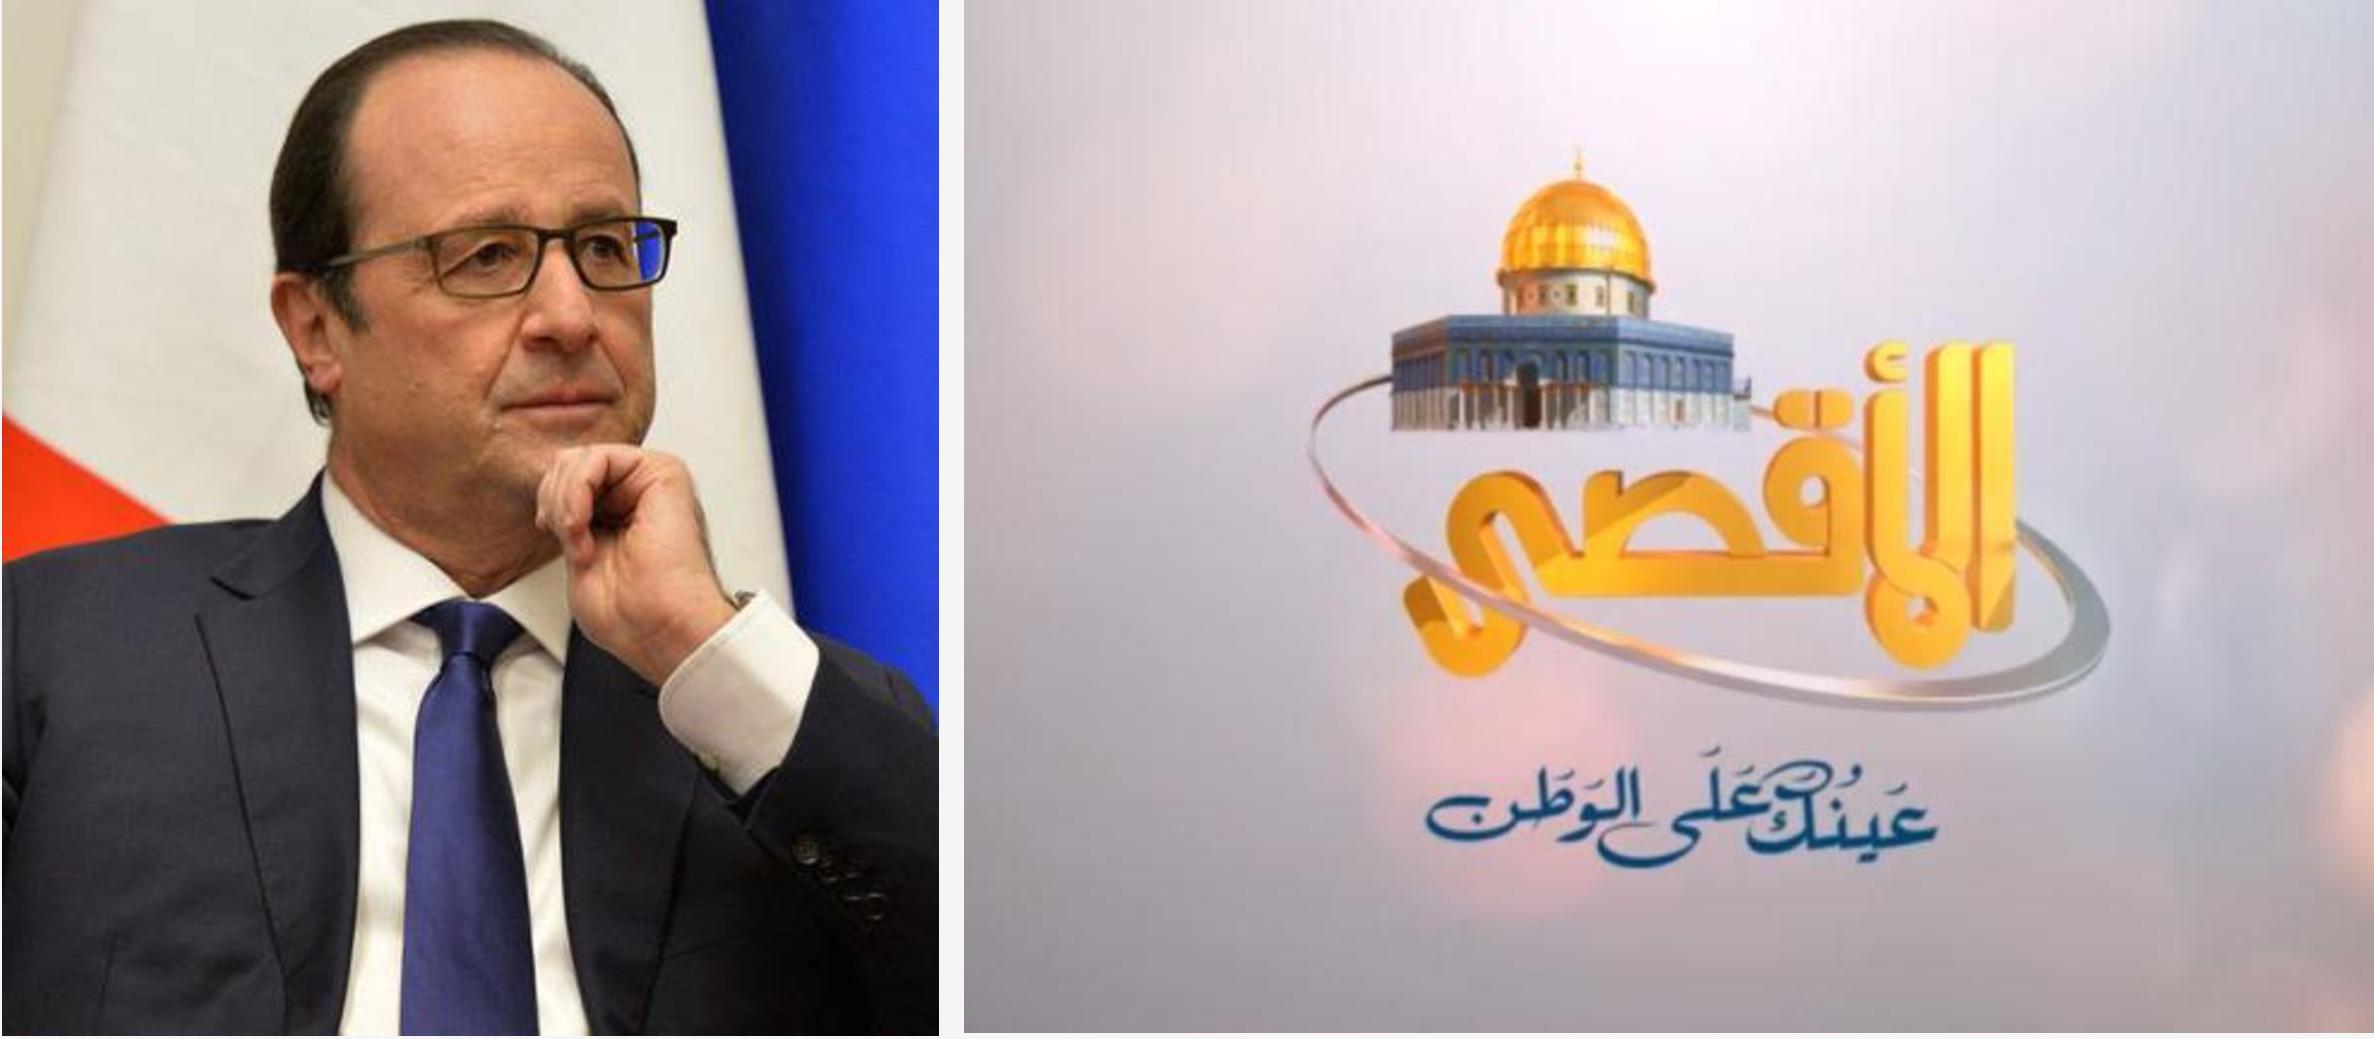 France shuts down Hamas TV channel – only for it to appear again